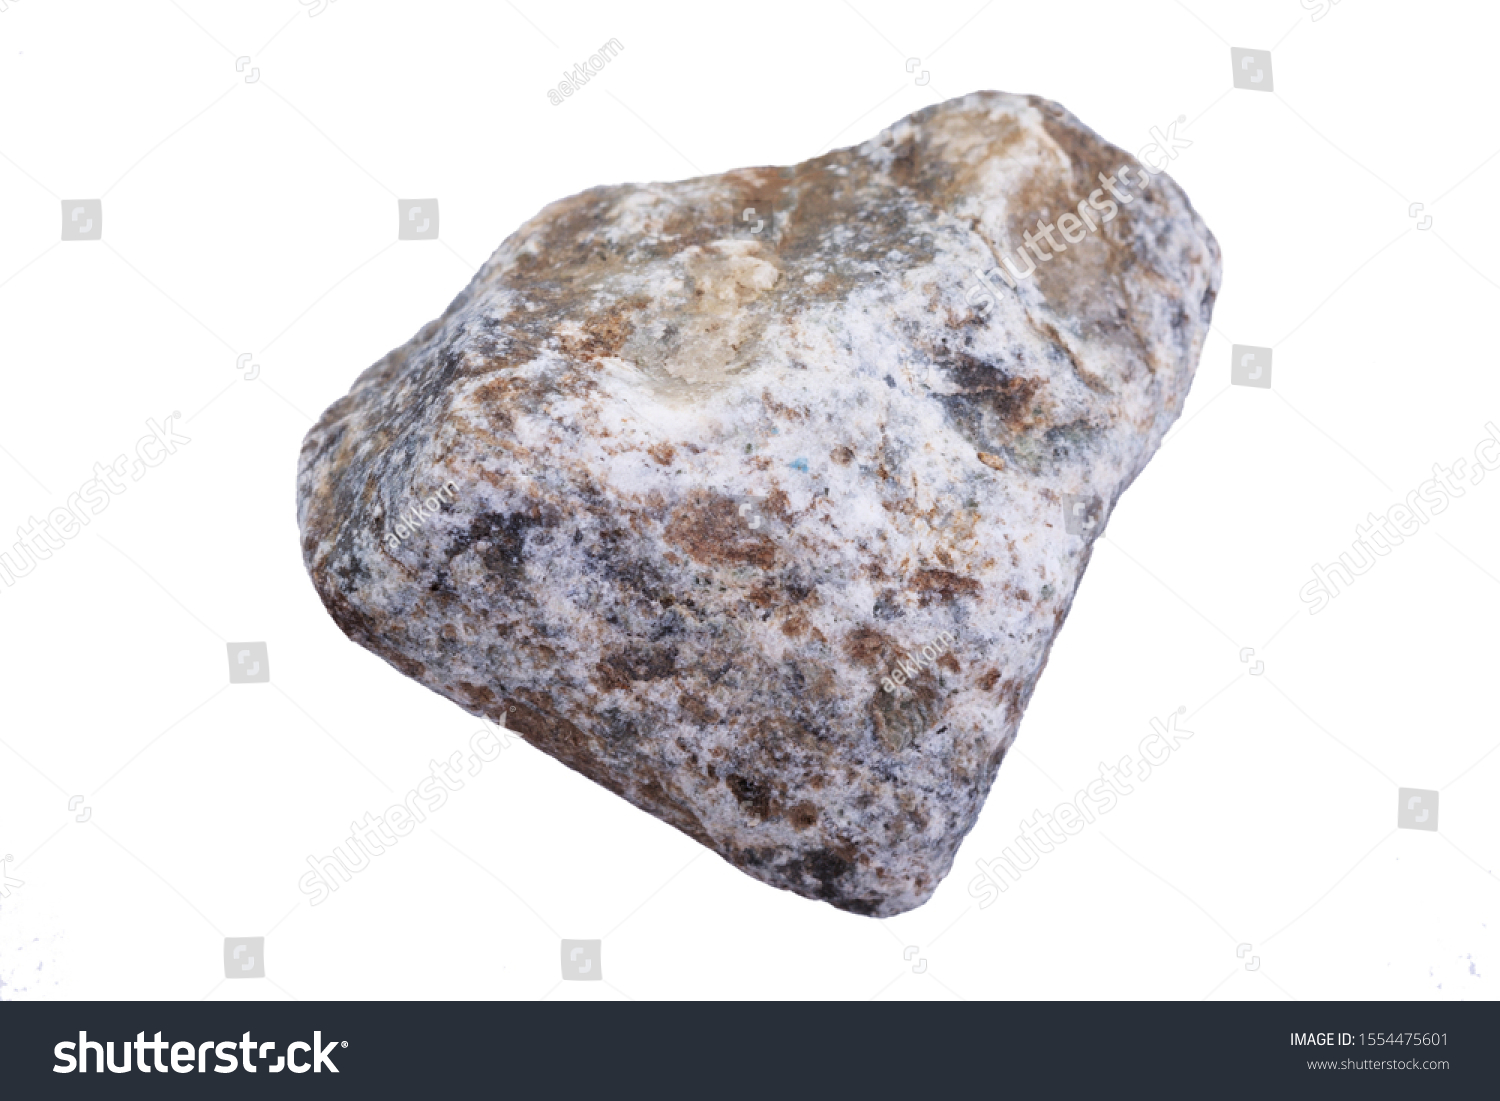  Stone Isolated on white background. Graphic Resources #1554475601